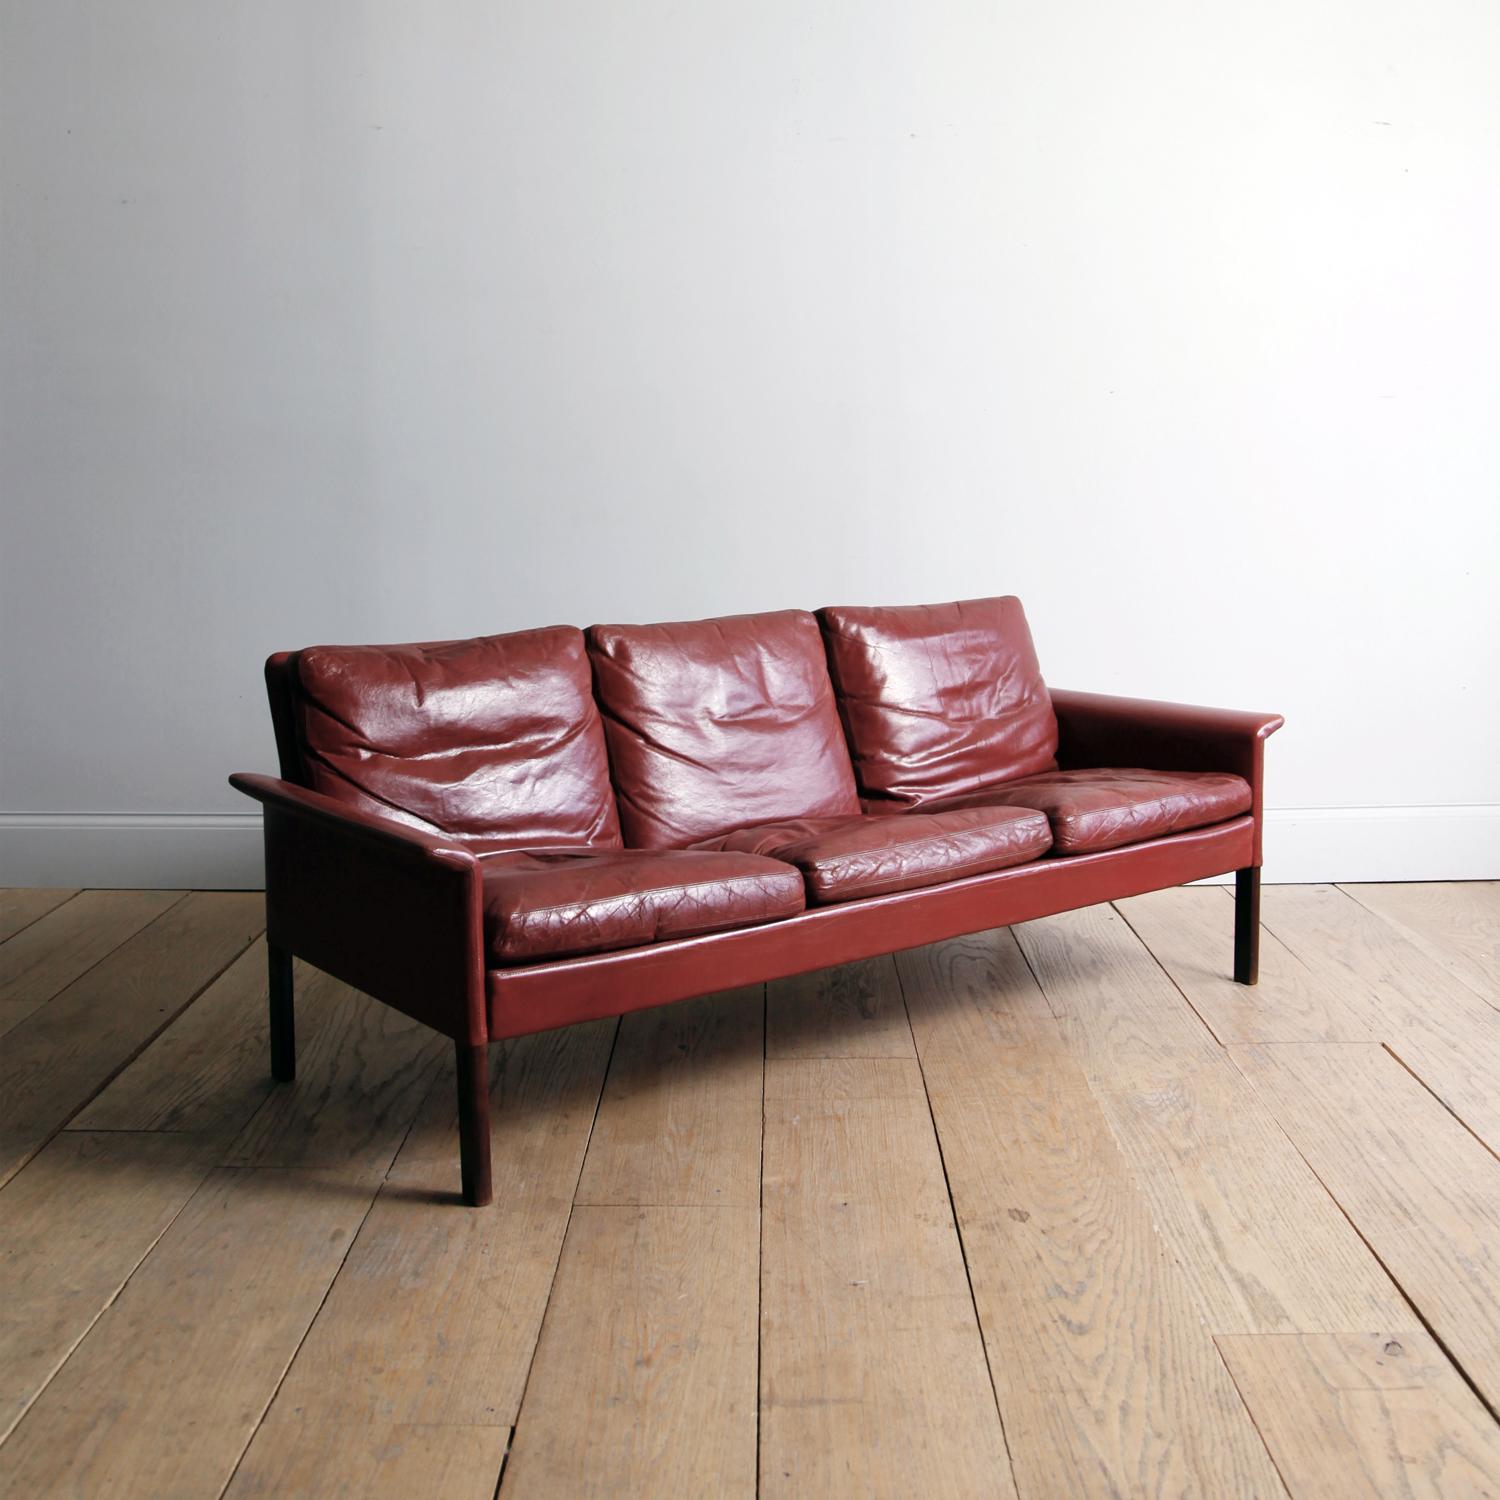 Hans Olsen was a cabinet-maker by training and later studied with the great architect-designer Kaare Klint. He prioritized comfort, and innovative use of materials.

This is a three-seat sofa with rosewood legs, wearing its original oxblood